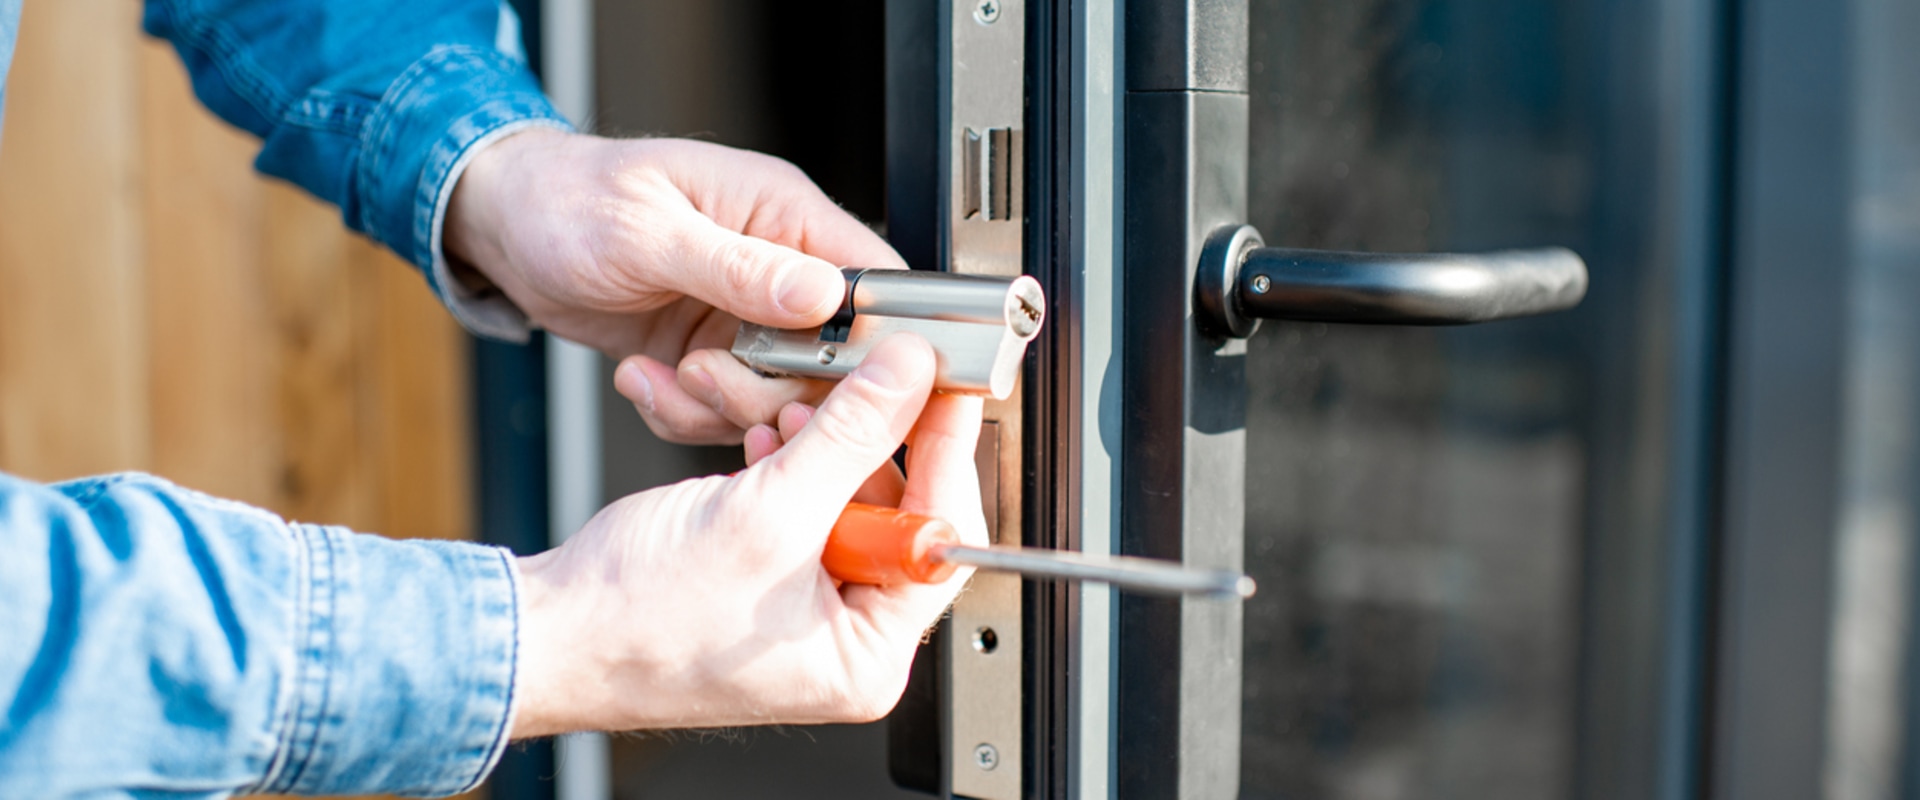 Do Locksmiths Keep Records? An Expert's Perspective